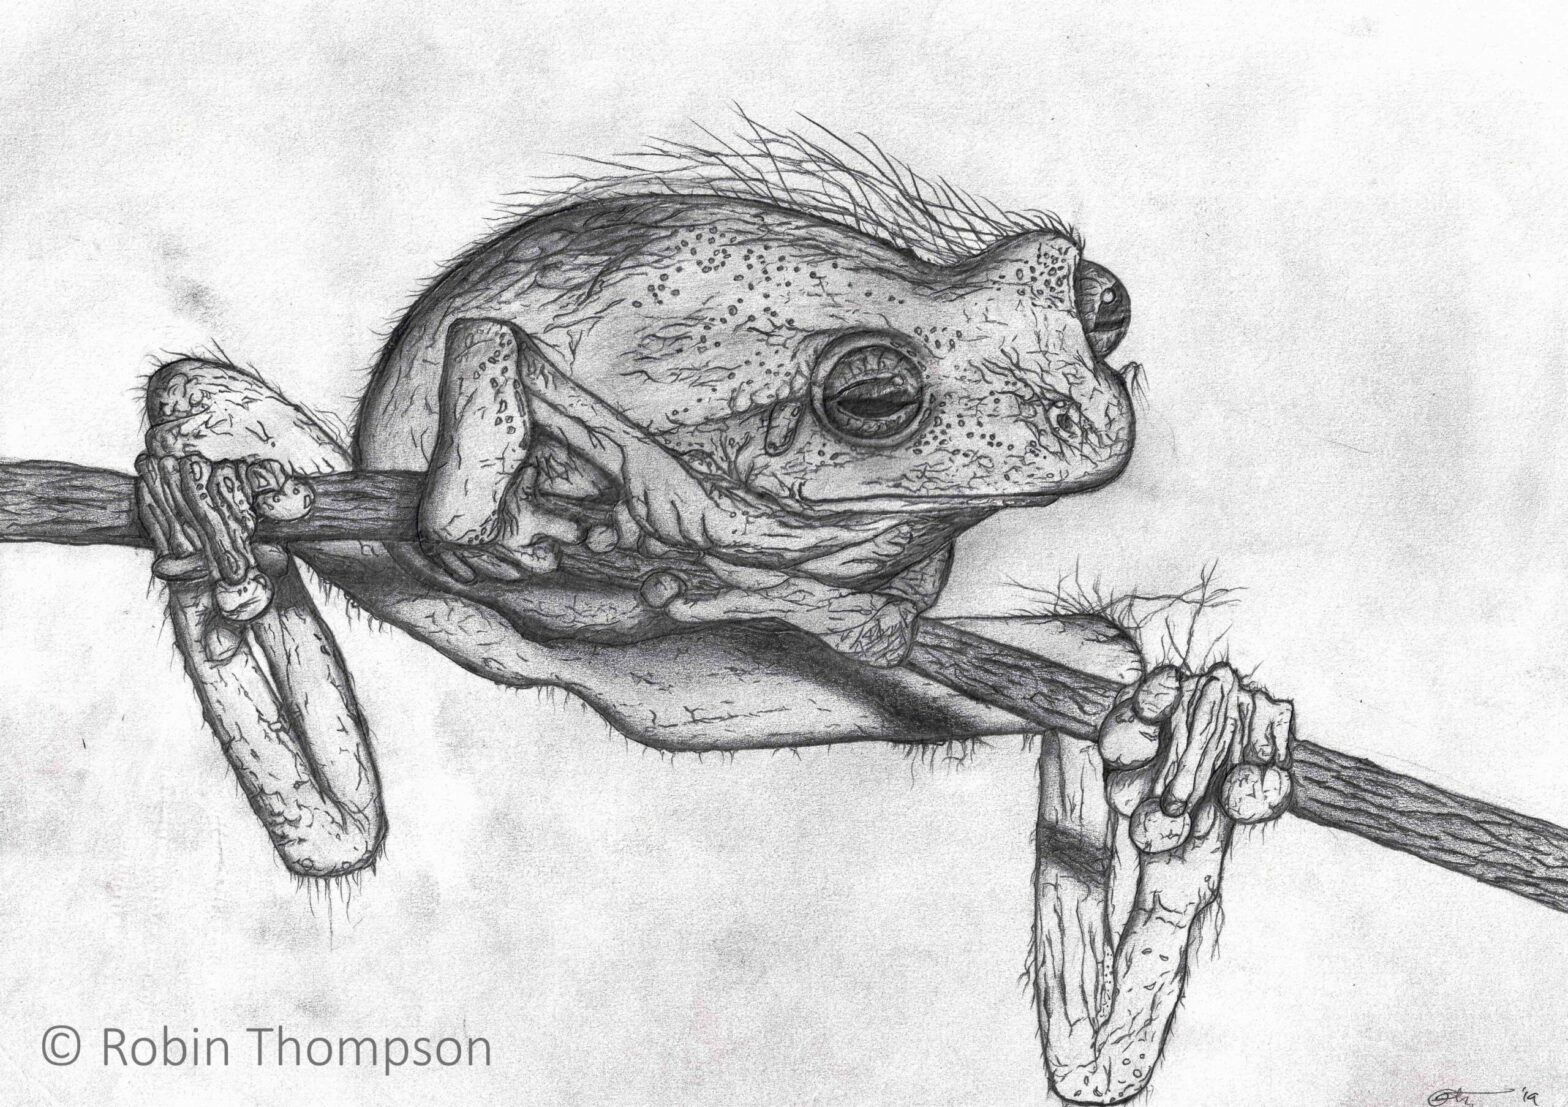 A black and white greylead pencil drawing of an Australian tree frog resting on a branch. The frog has what appear to be thin hairs flowing from its skin.